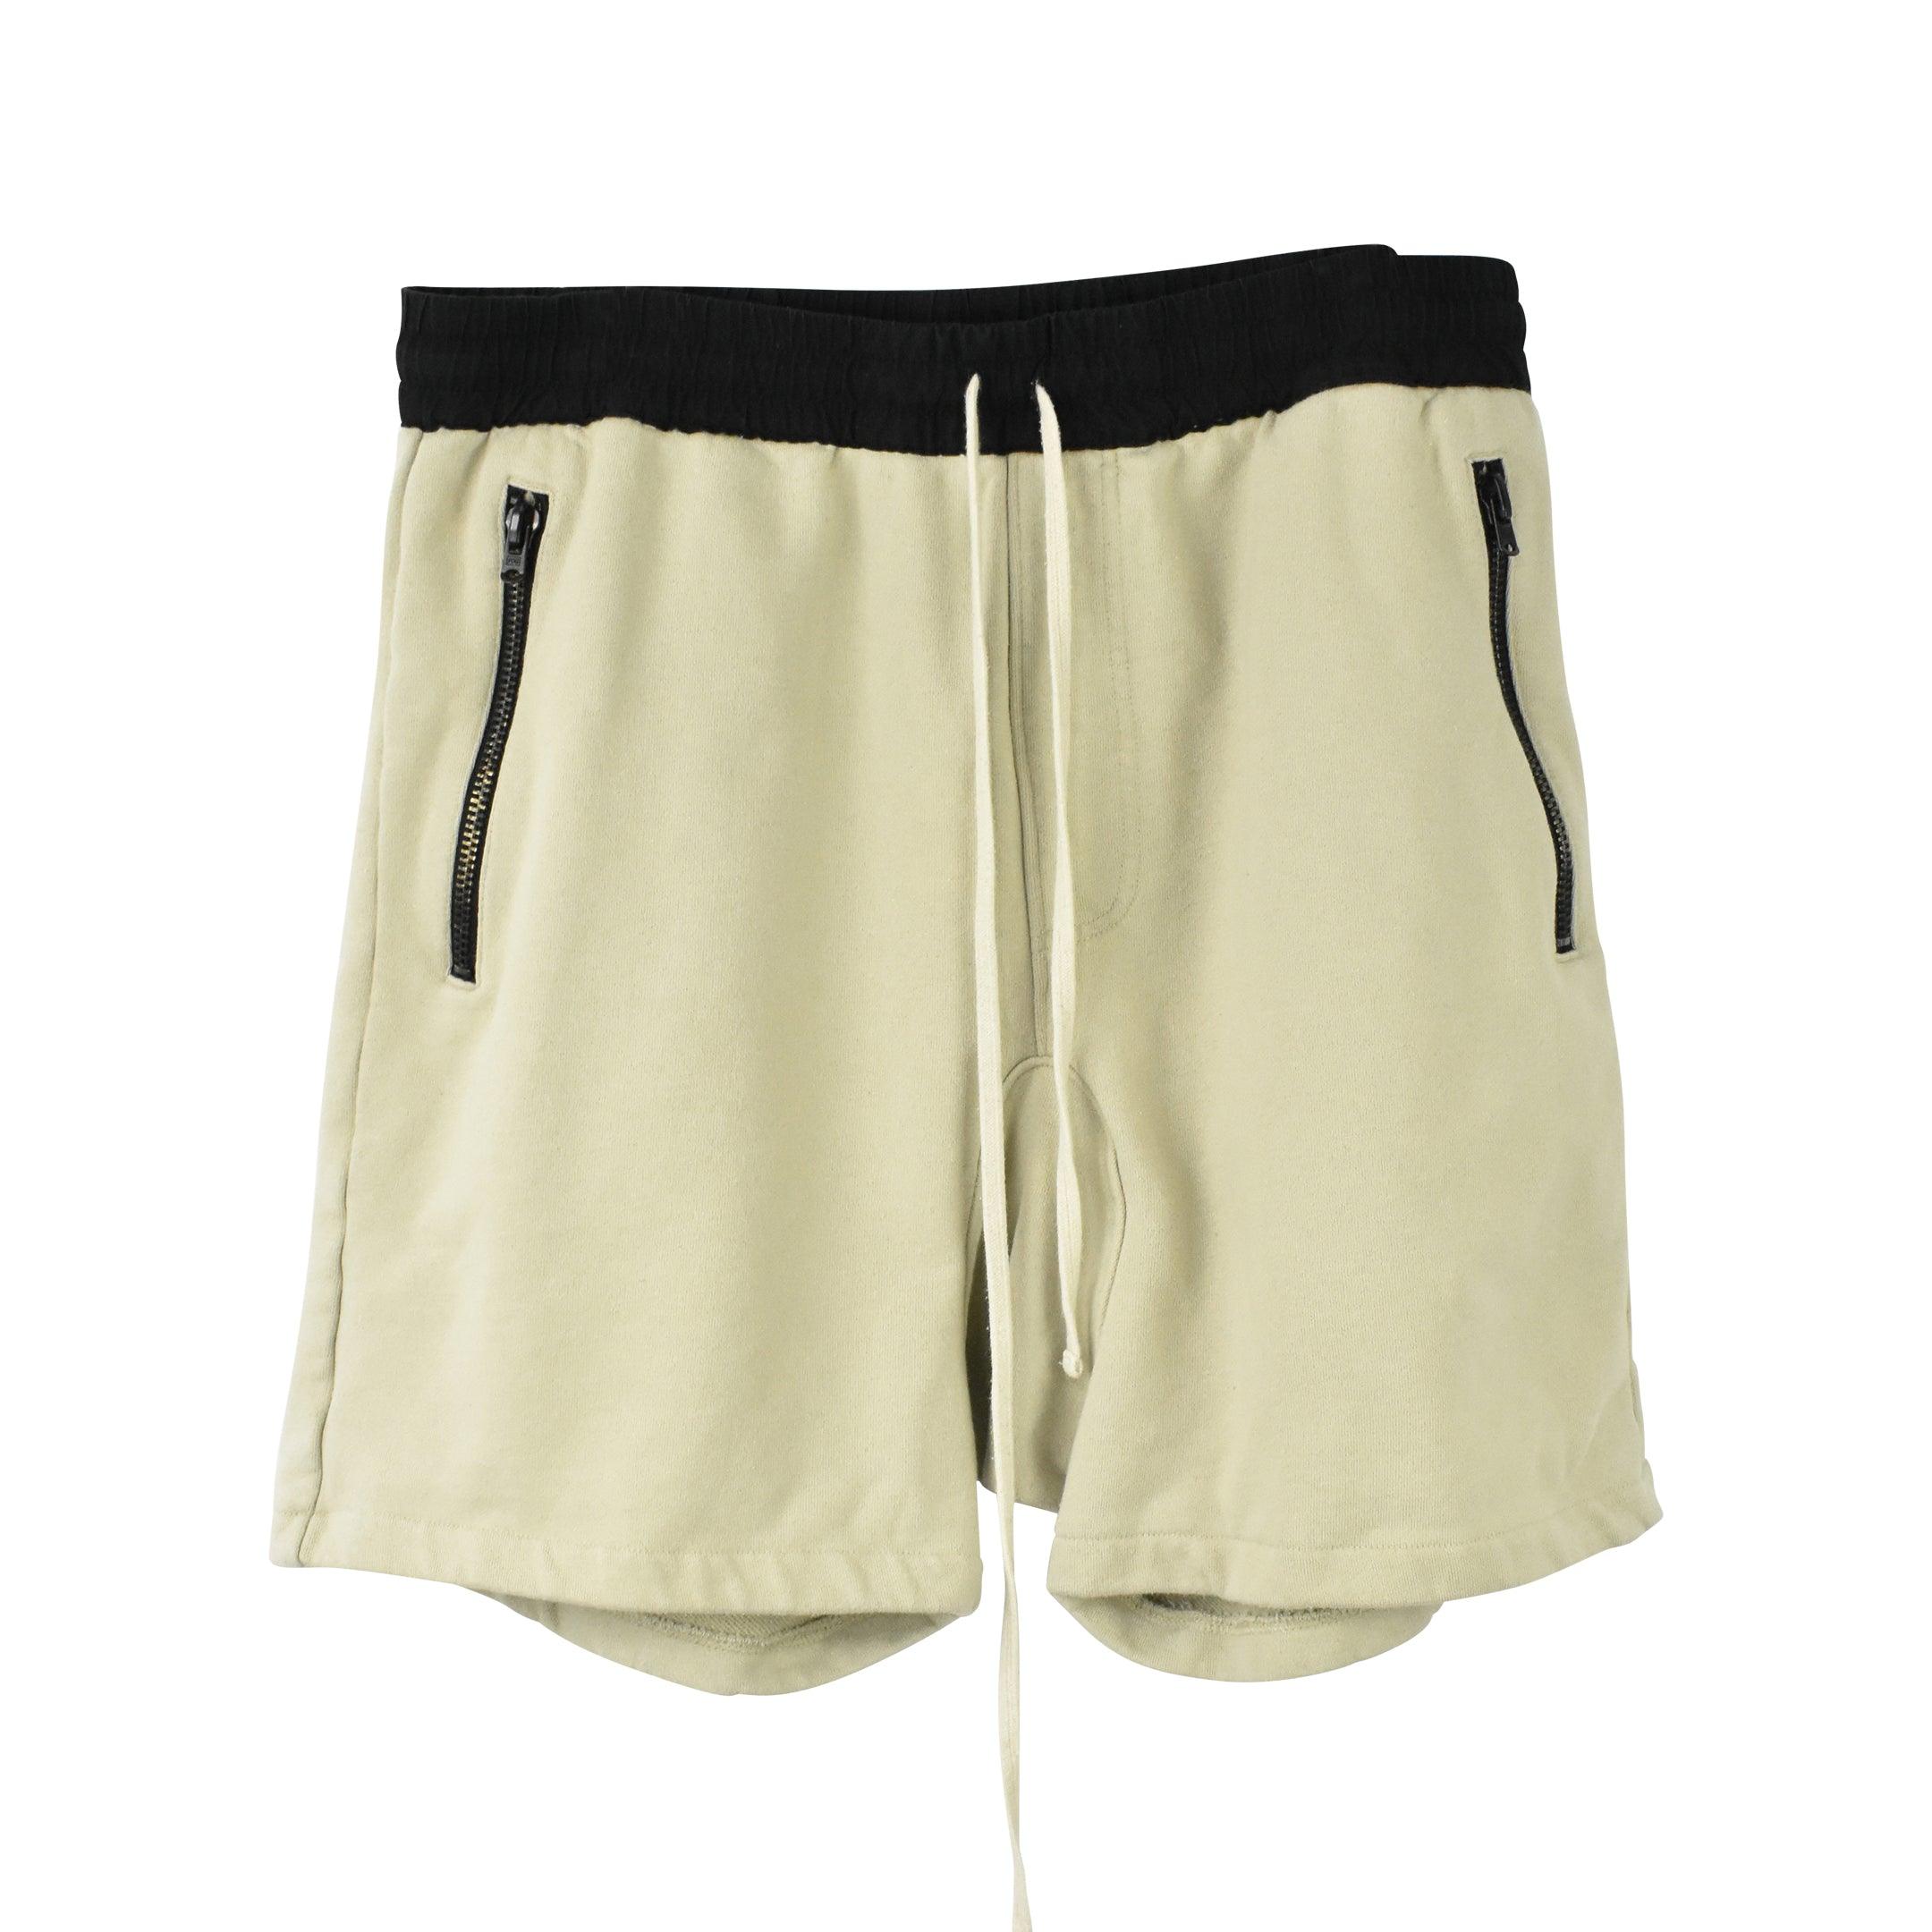 Fear of God Shorts - Men's L - Fashionably Yours